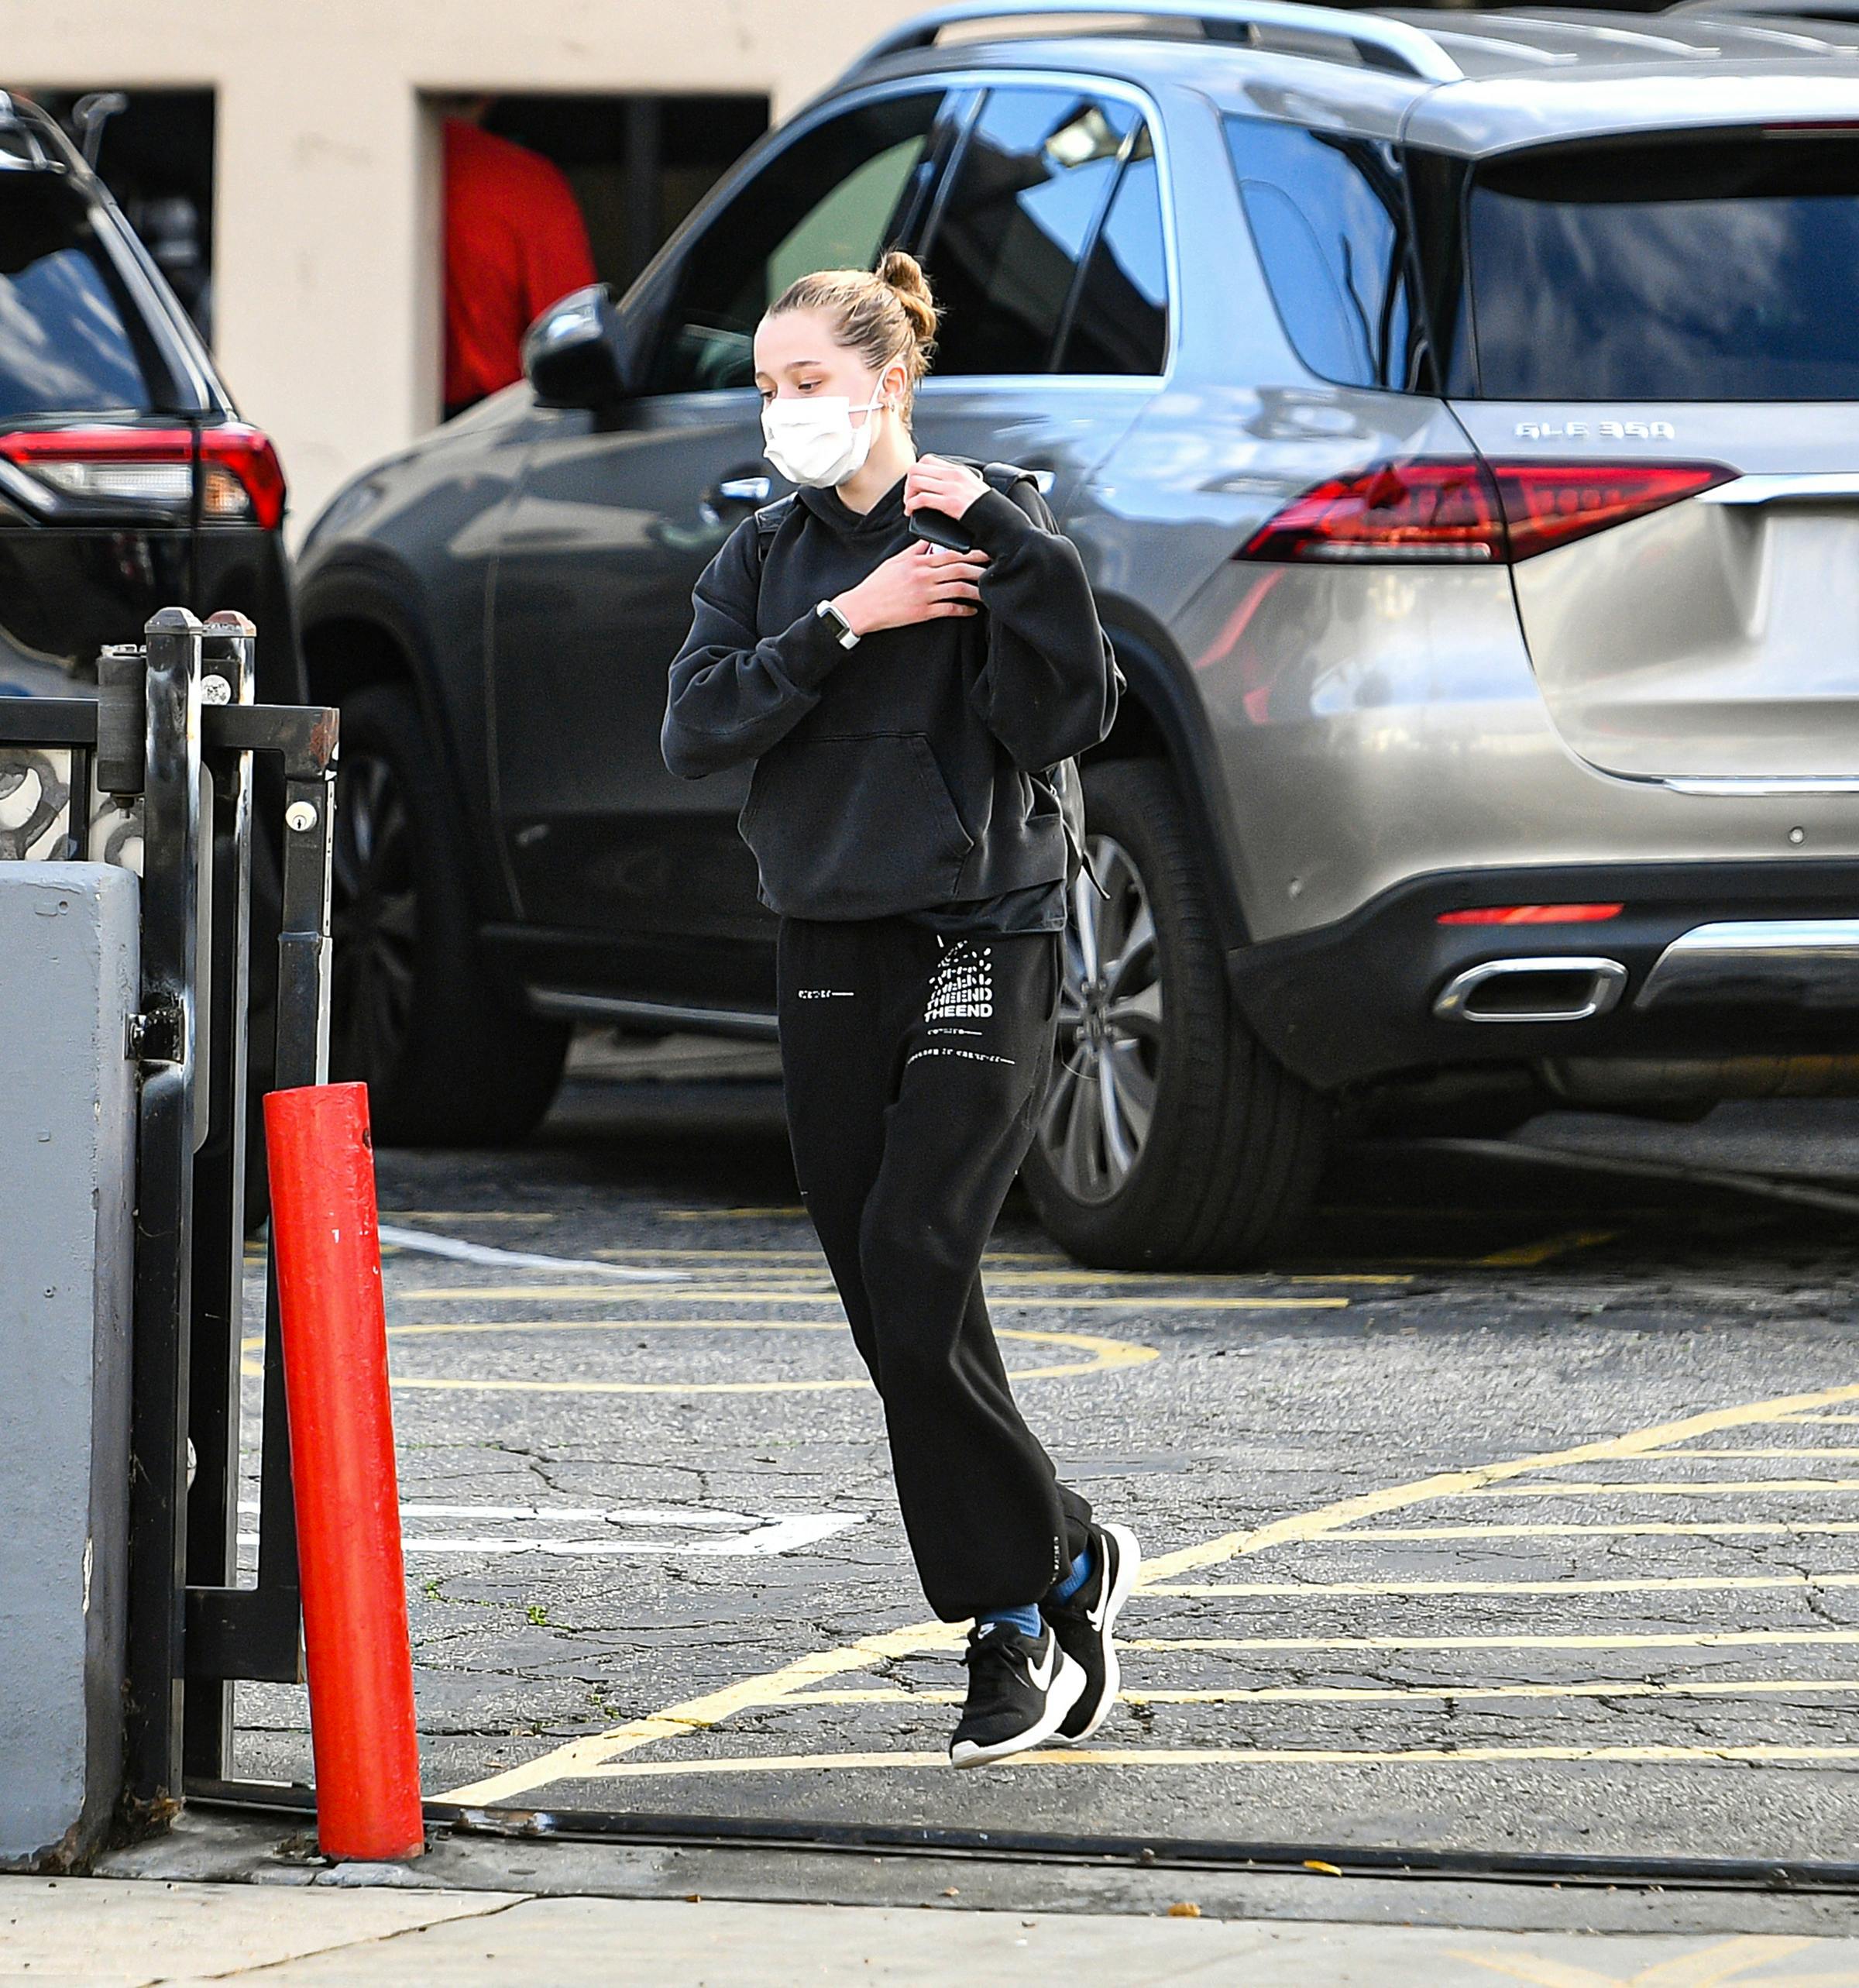 Vivienne Jolie-Pitt Spotted Out After Dance Class in Los Angeles, CA. ***SPECIAL INSTRUCTIONS*** Please pixelate children's faces before publication.***. 29 Dec 2021 Pictured: Vivienne Jolie-Pitt Spotted Out After Dance Class in Los Angeles, CA. Photo credit: MEGA TheMegaAgency.com +1 888 505 6342 (Mega Agency TagID: MEGA816637_003.jpg) [Photo via Mega Agency]